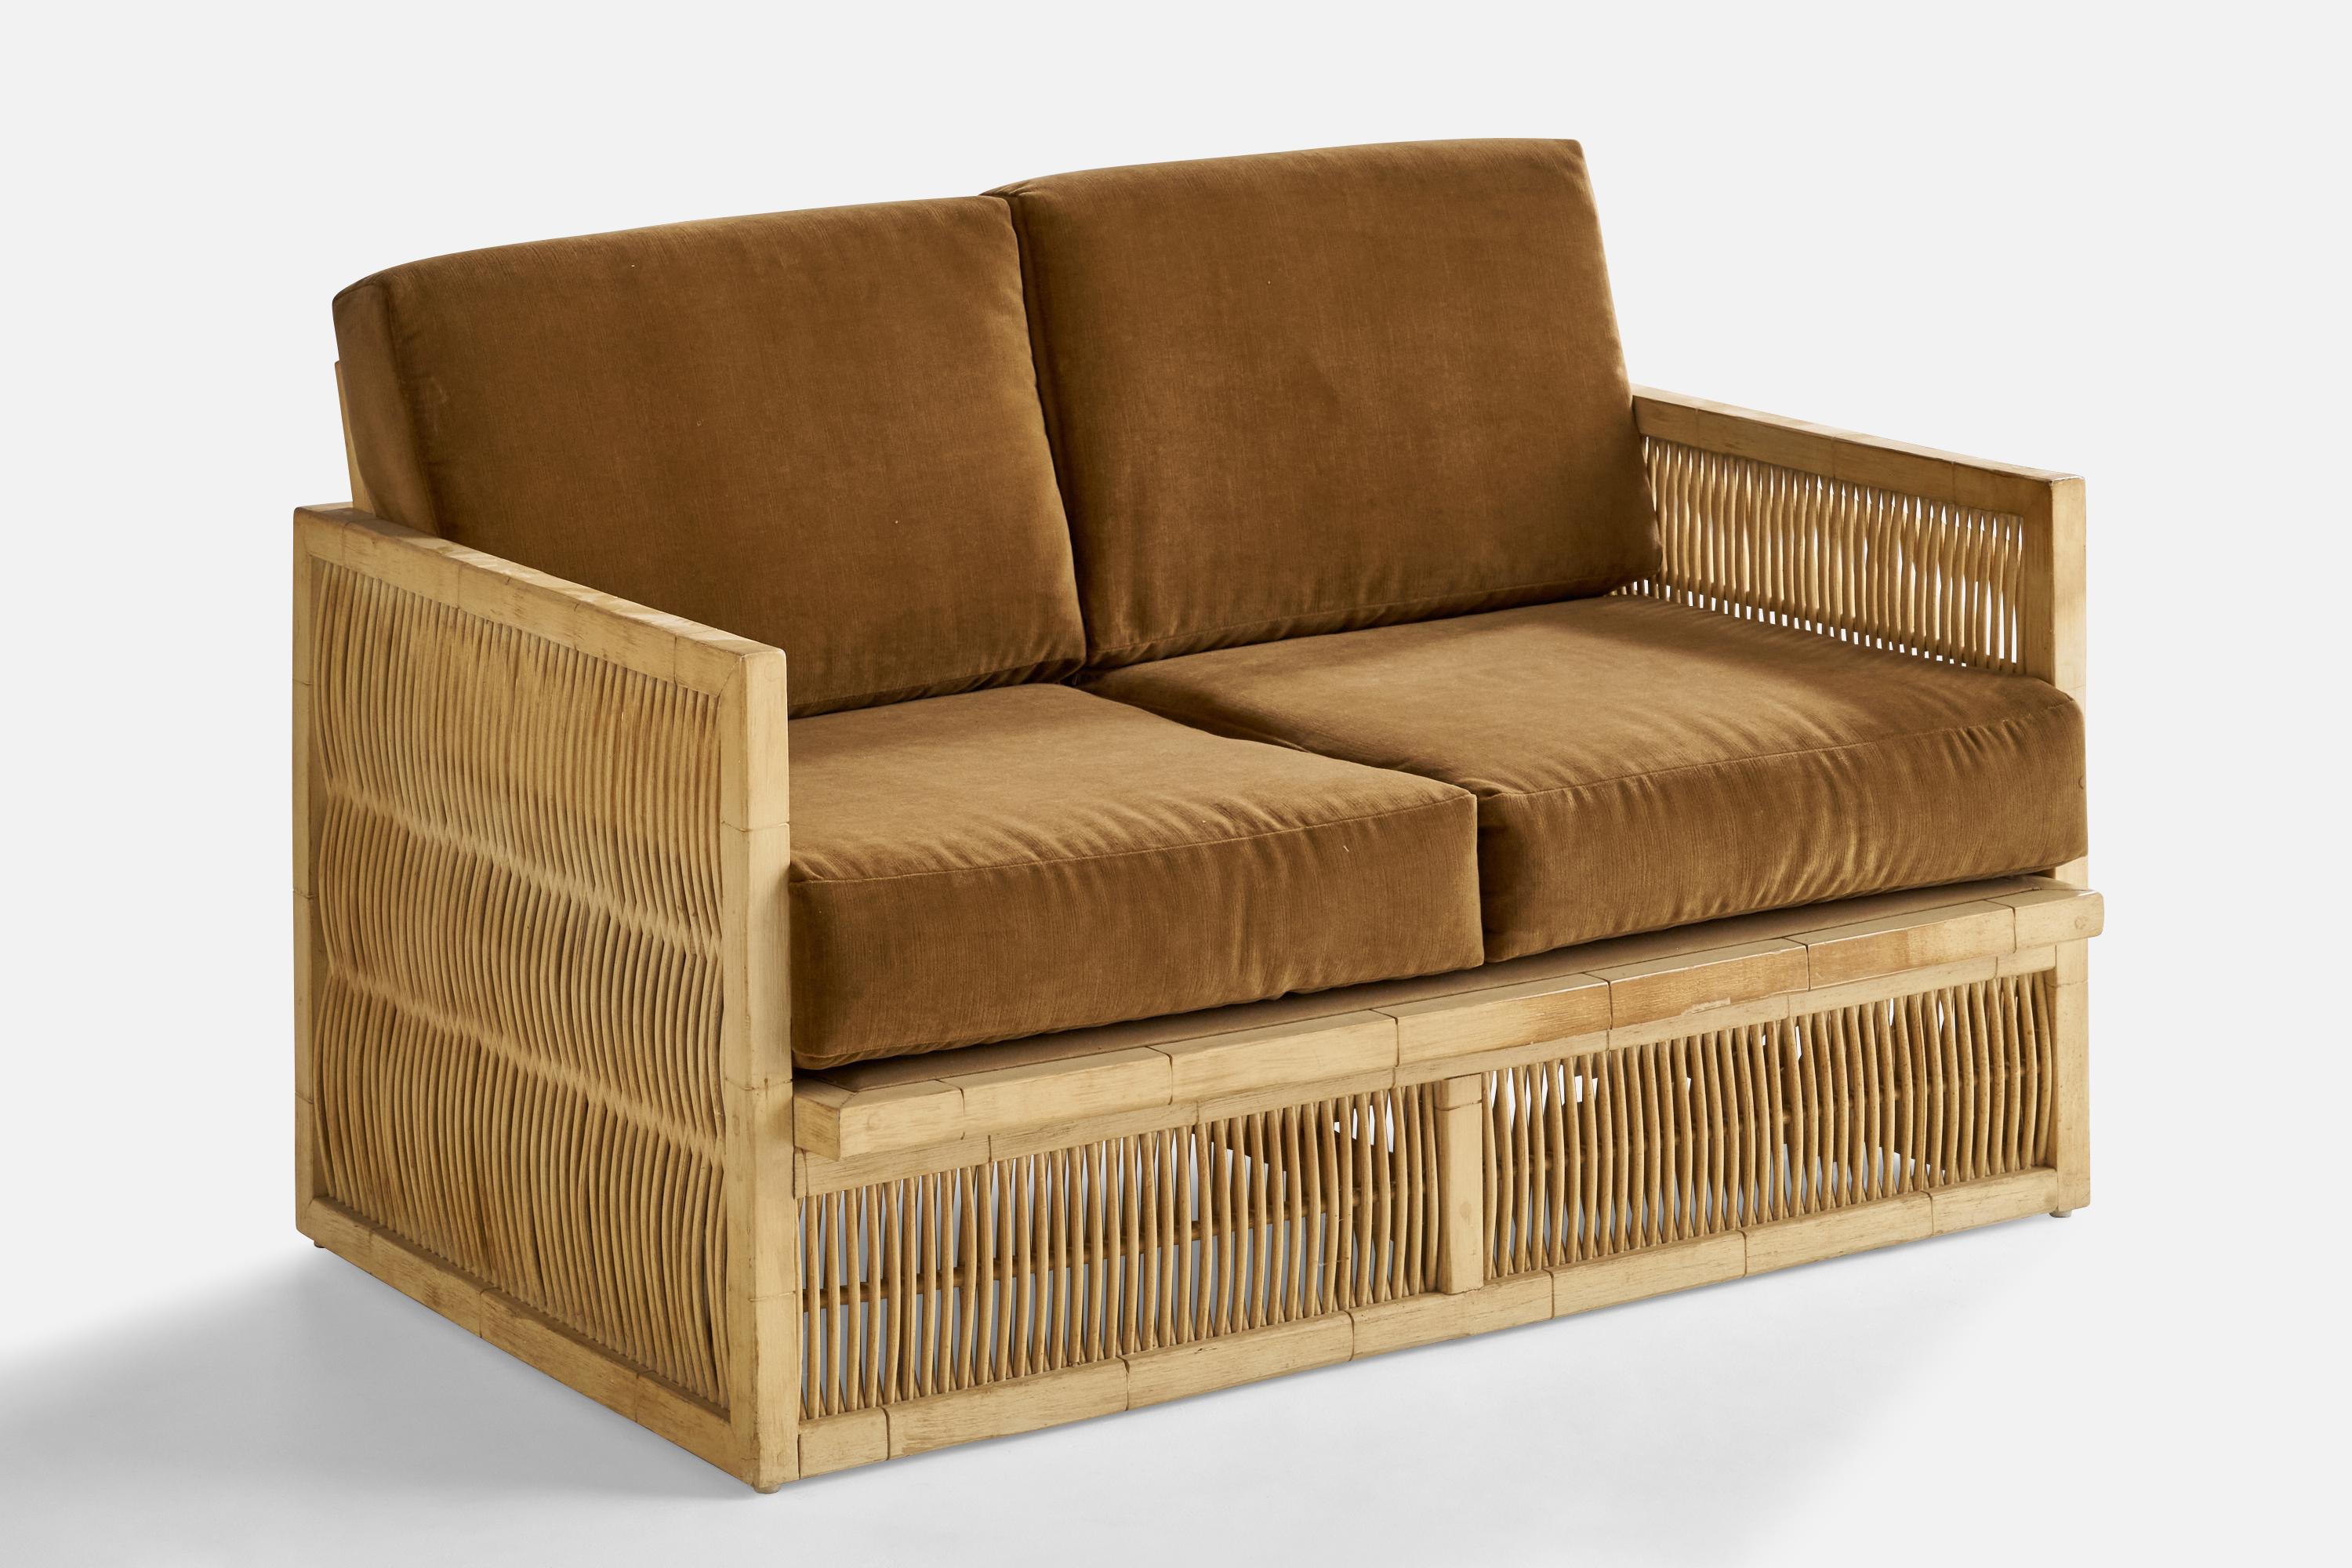 A cerused oak, bamboo and grey brown velvet sofa designed and produced in the US, 1960s.

Seat height: 17.25”